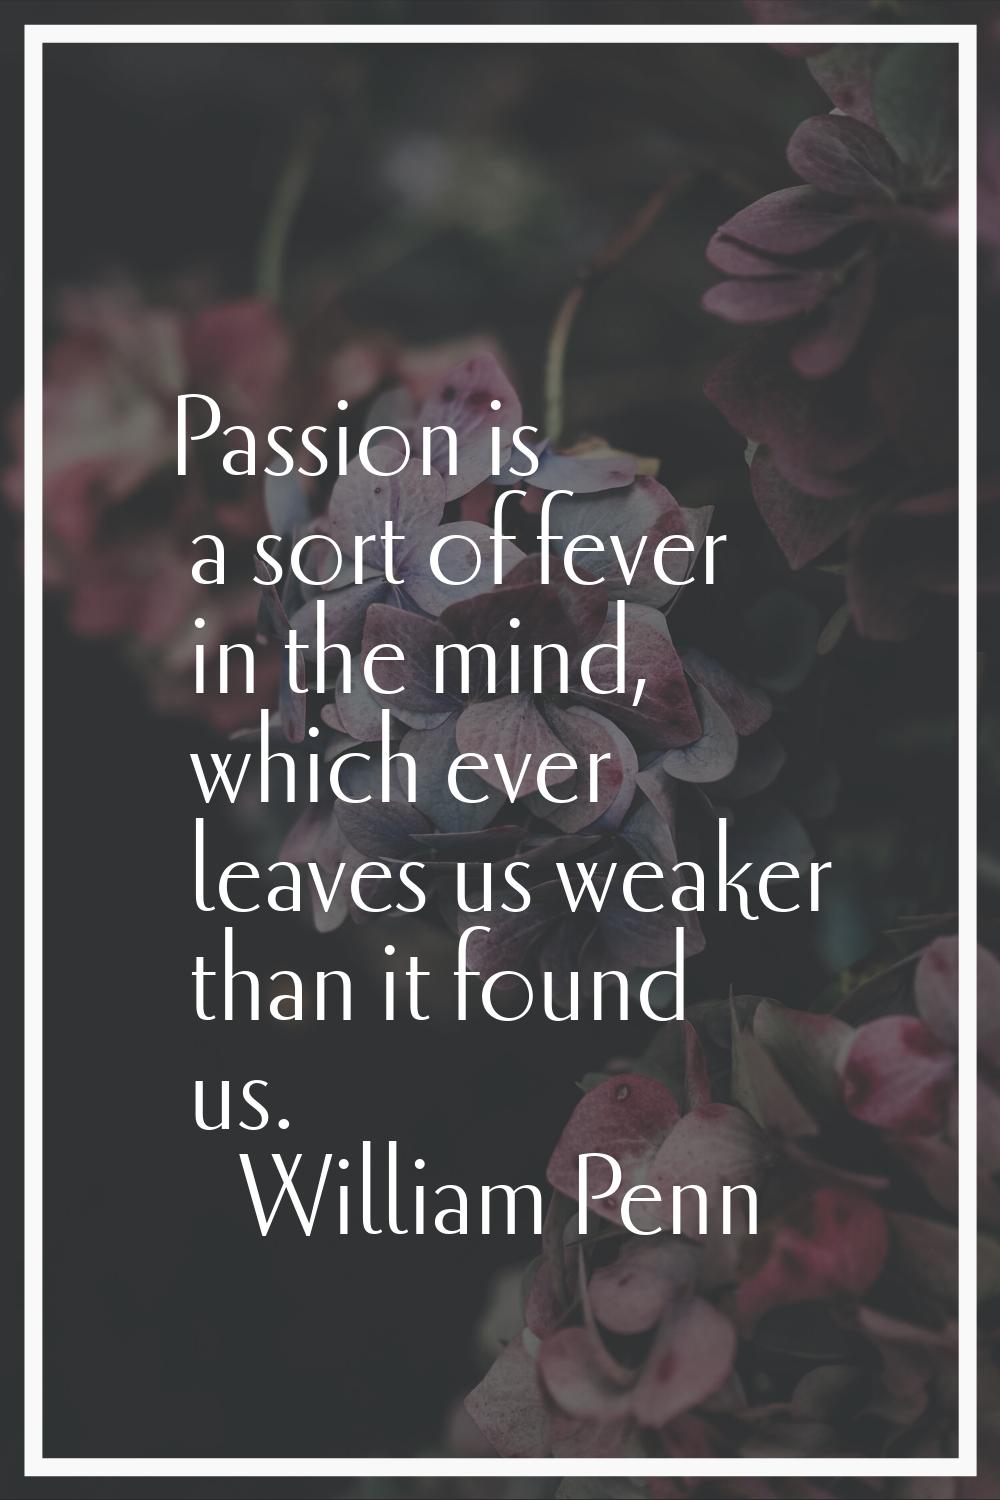 Passion is a sort of fever in the mind, which ever leaves us weaker than it found us.